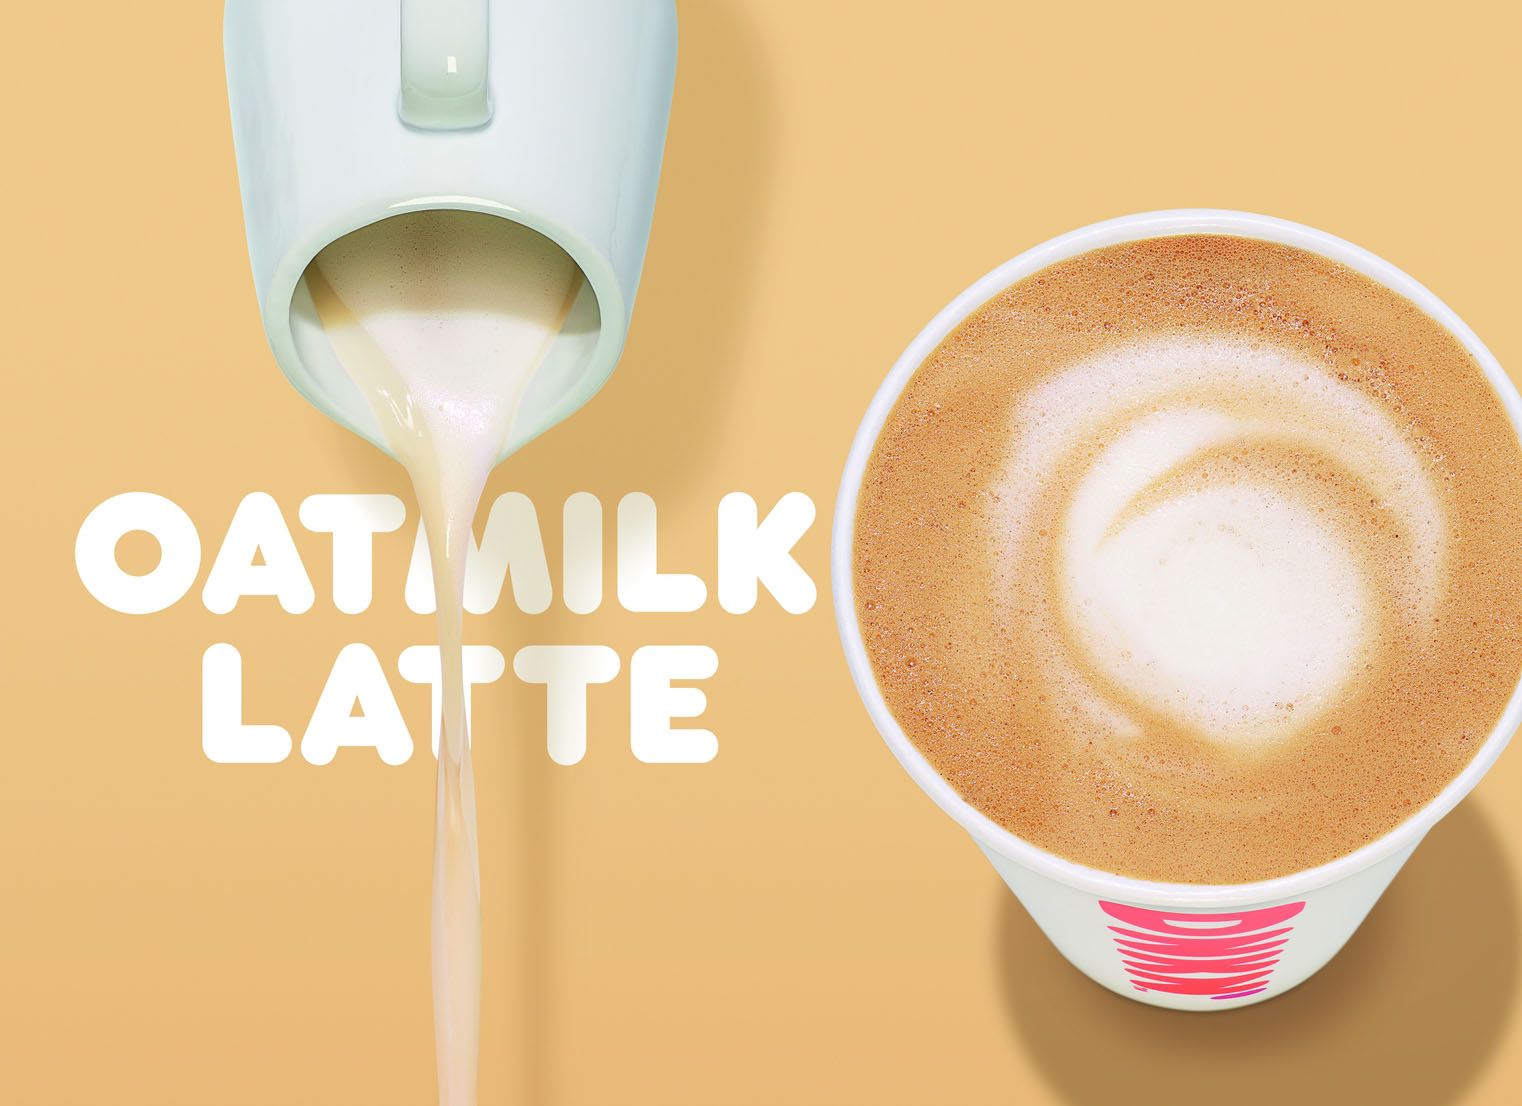 Non-Dairy Milk Substitute Now Offered with Nationwide Oatmilk Launch at Dunkin' Donuts 